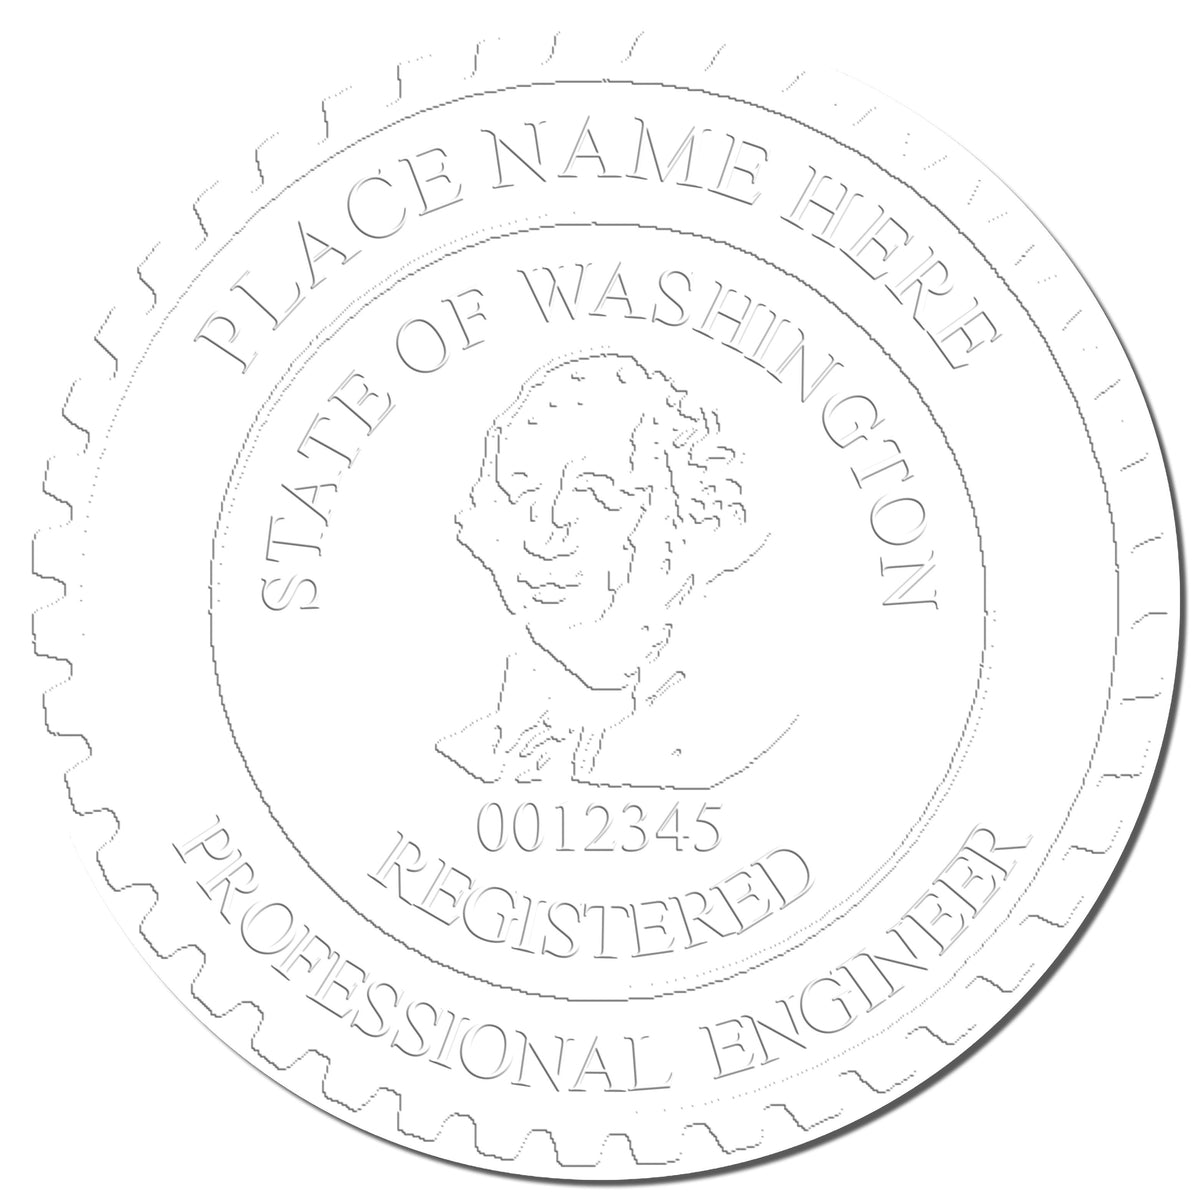 The Long Reach Washington PE Seal stamp impression comes to life with a crisp, detailed photo on paper - showcasing true professional quality.